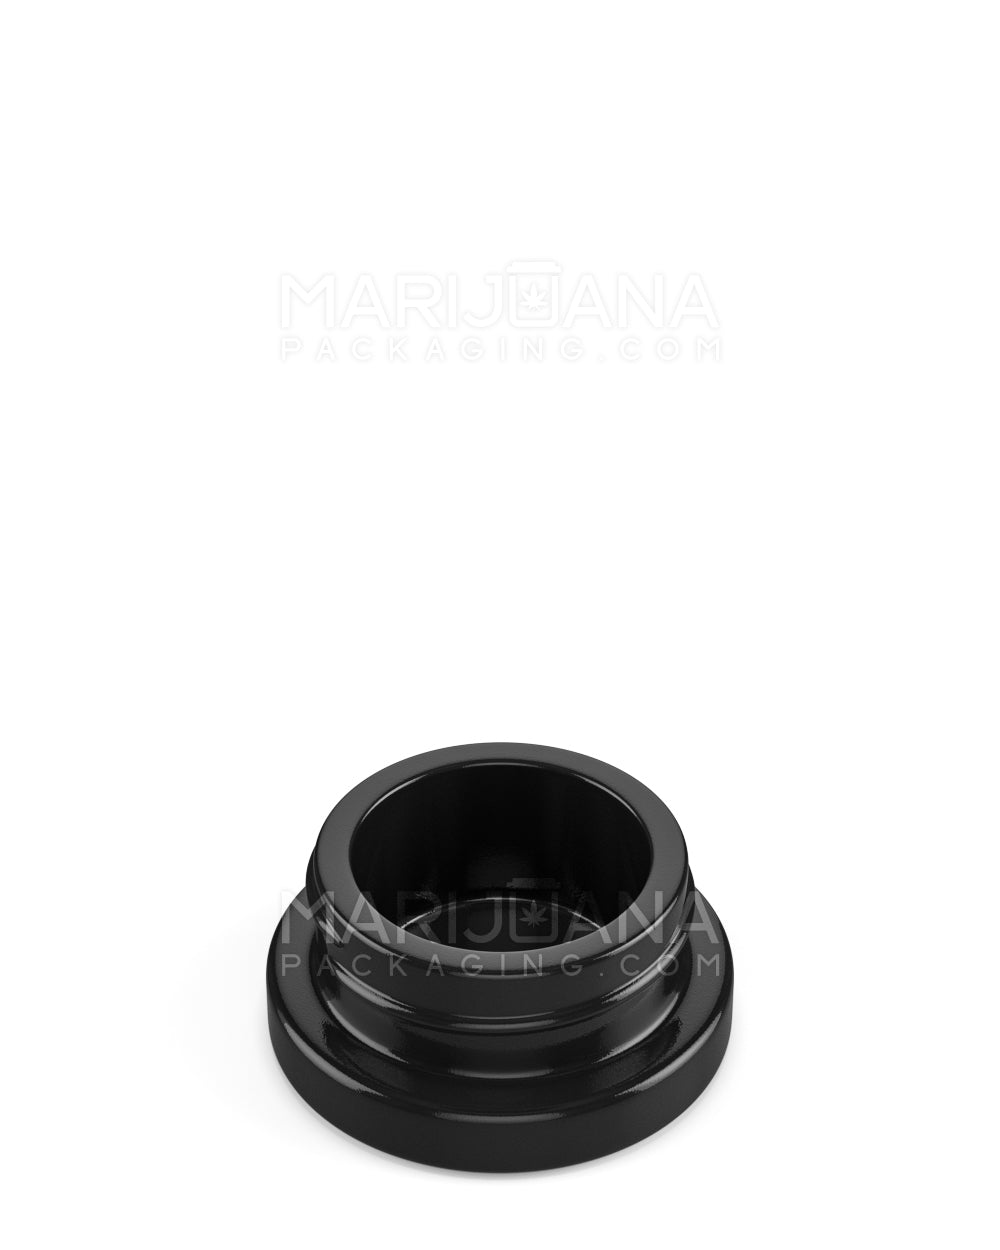 Child Resistant | Black Glass Concentrate Jar with Black Cap | 38mm - 9mL - 320 Count - 3